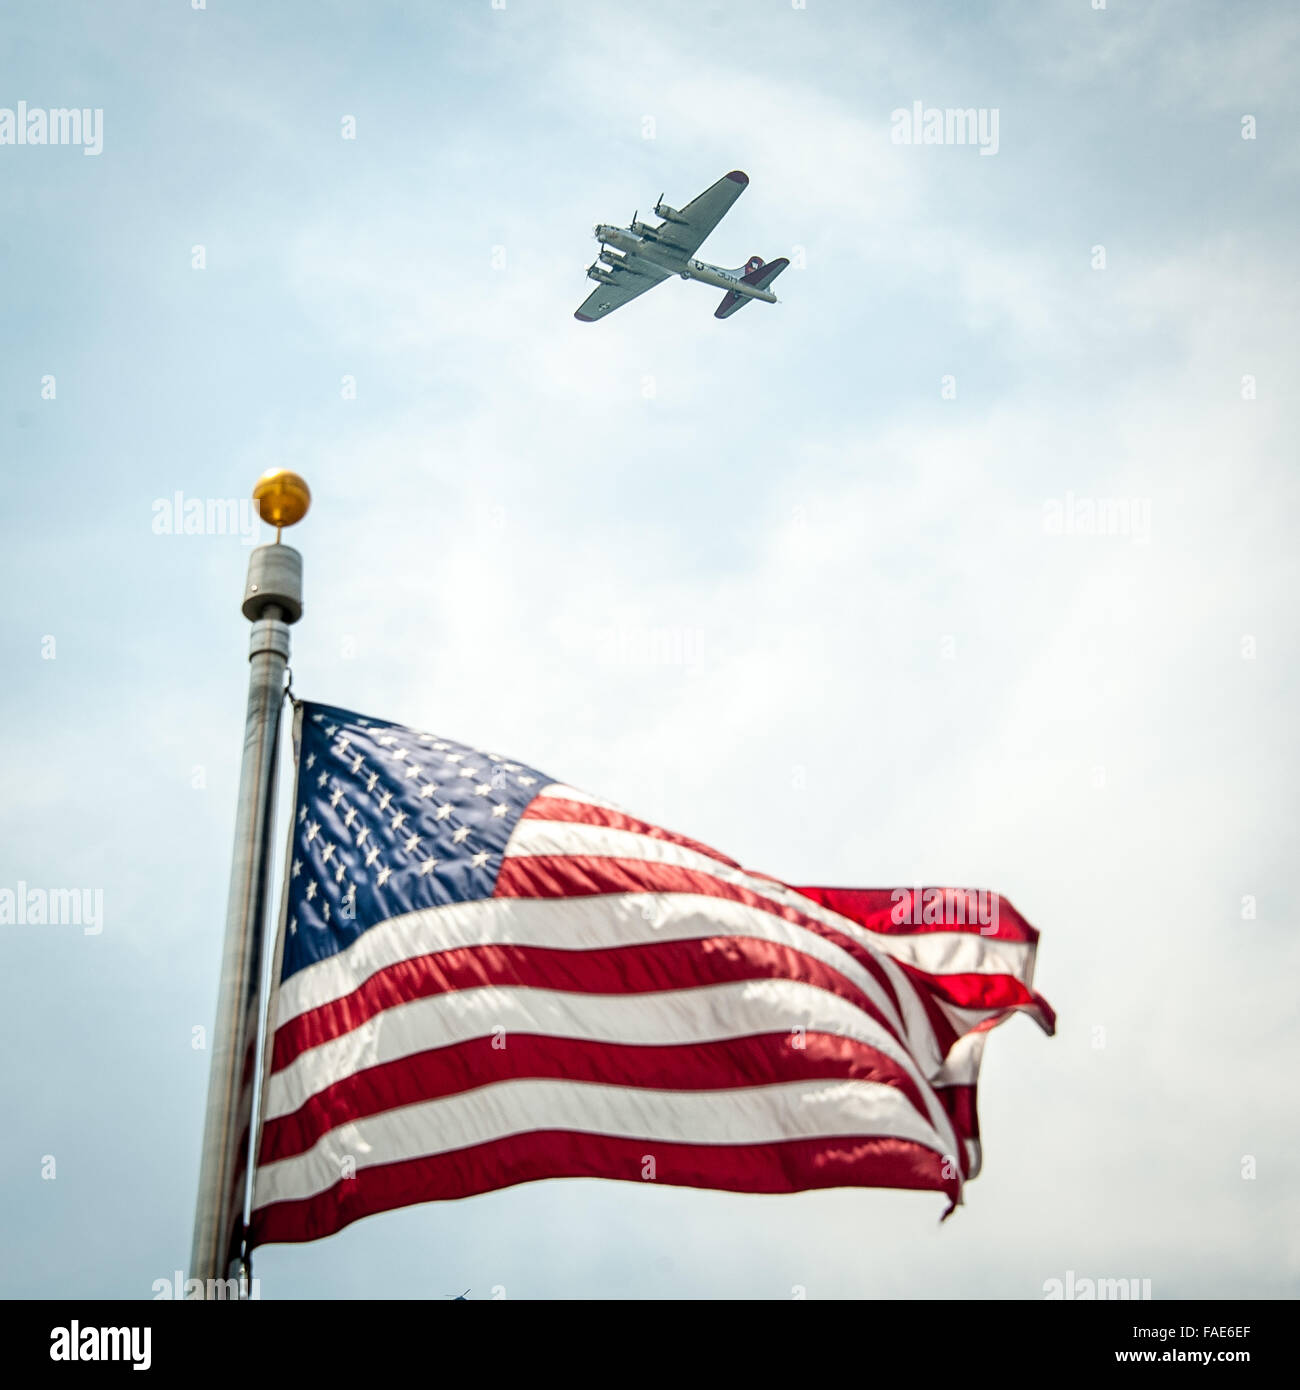 Airplanes flying over the American flag Stock Photo